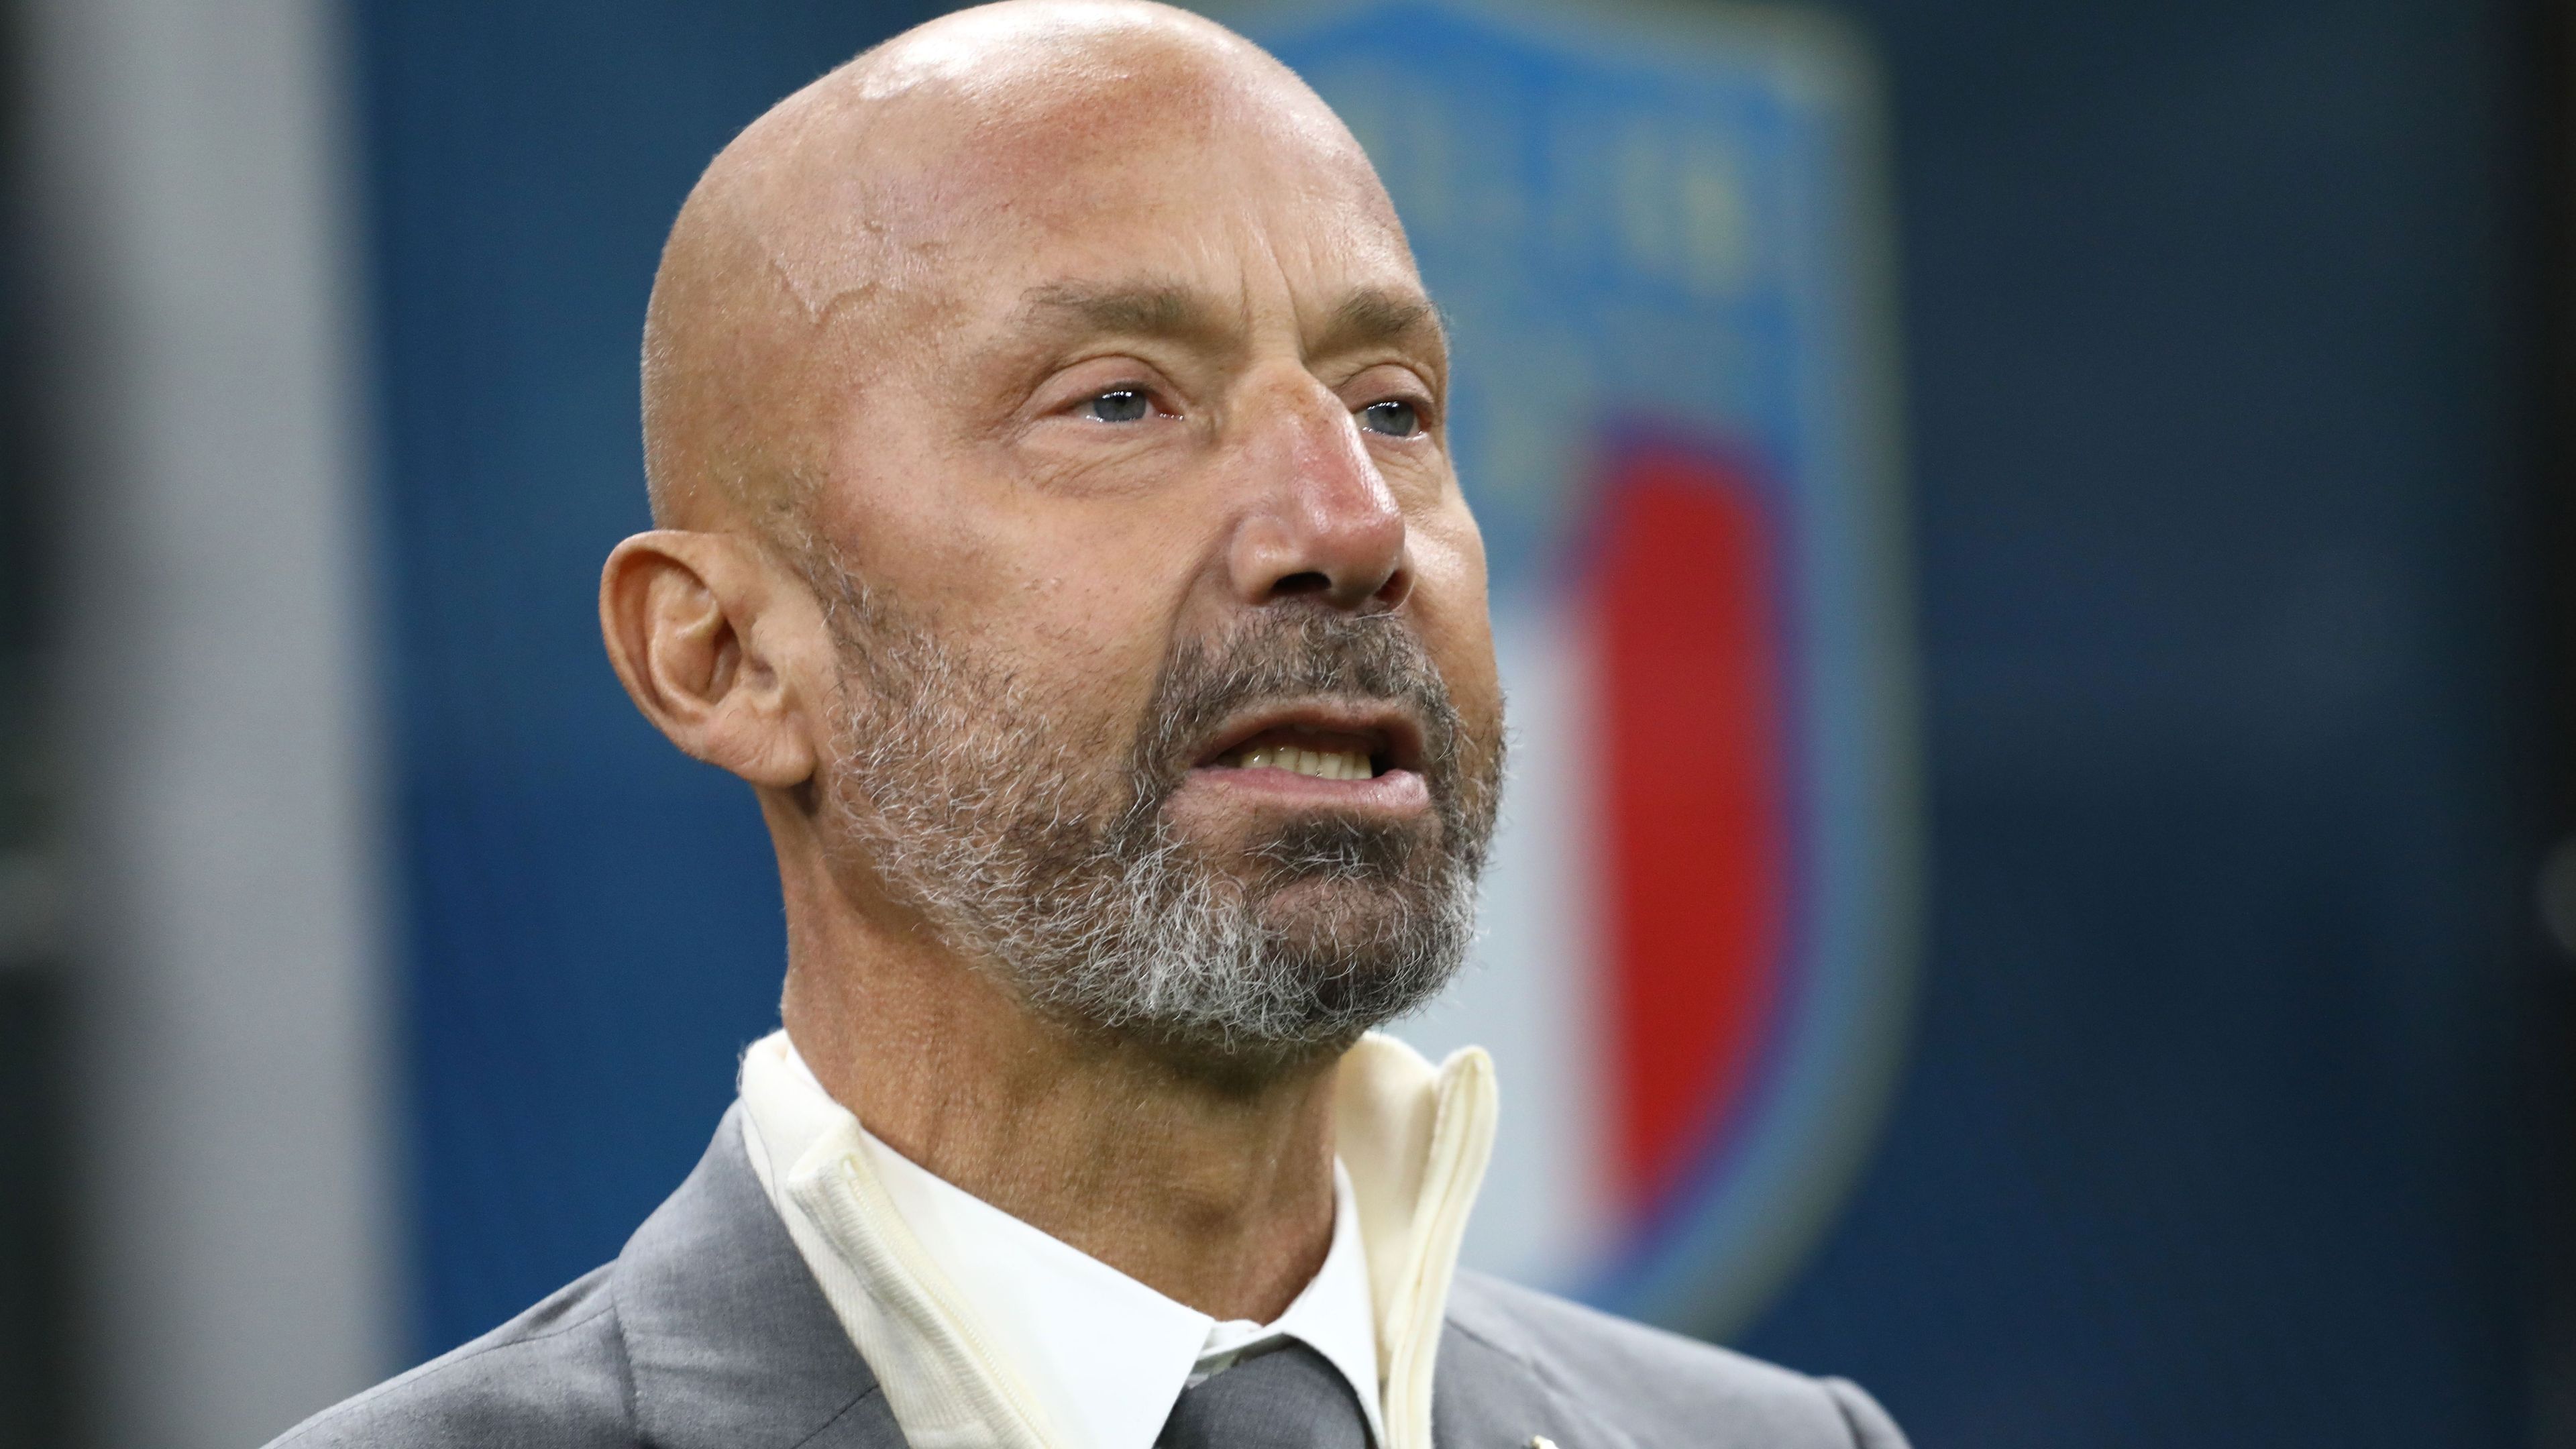 MILAN, ITALY - SEPTEMBER 23: Gianluca Vialli of Italy looks on before the UEFA Nations League League A Group 3 match between Italy and England at San Siro on September 23, 2022 in Milan, Italy. (Photo by Marco Luzzani/Getty Images)